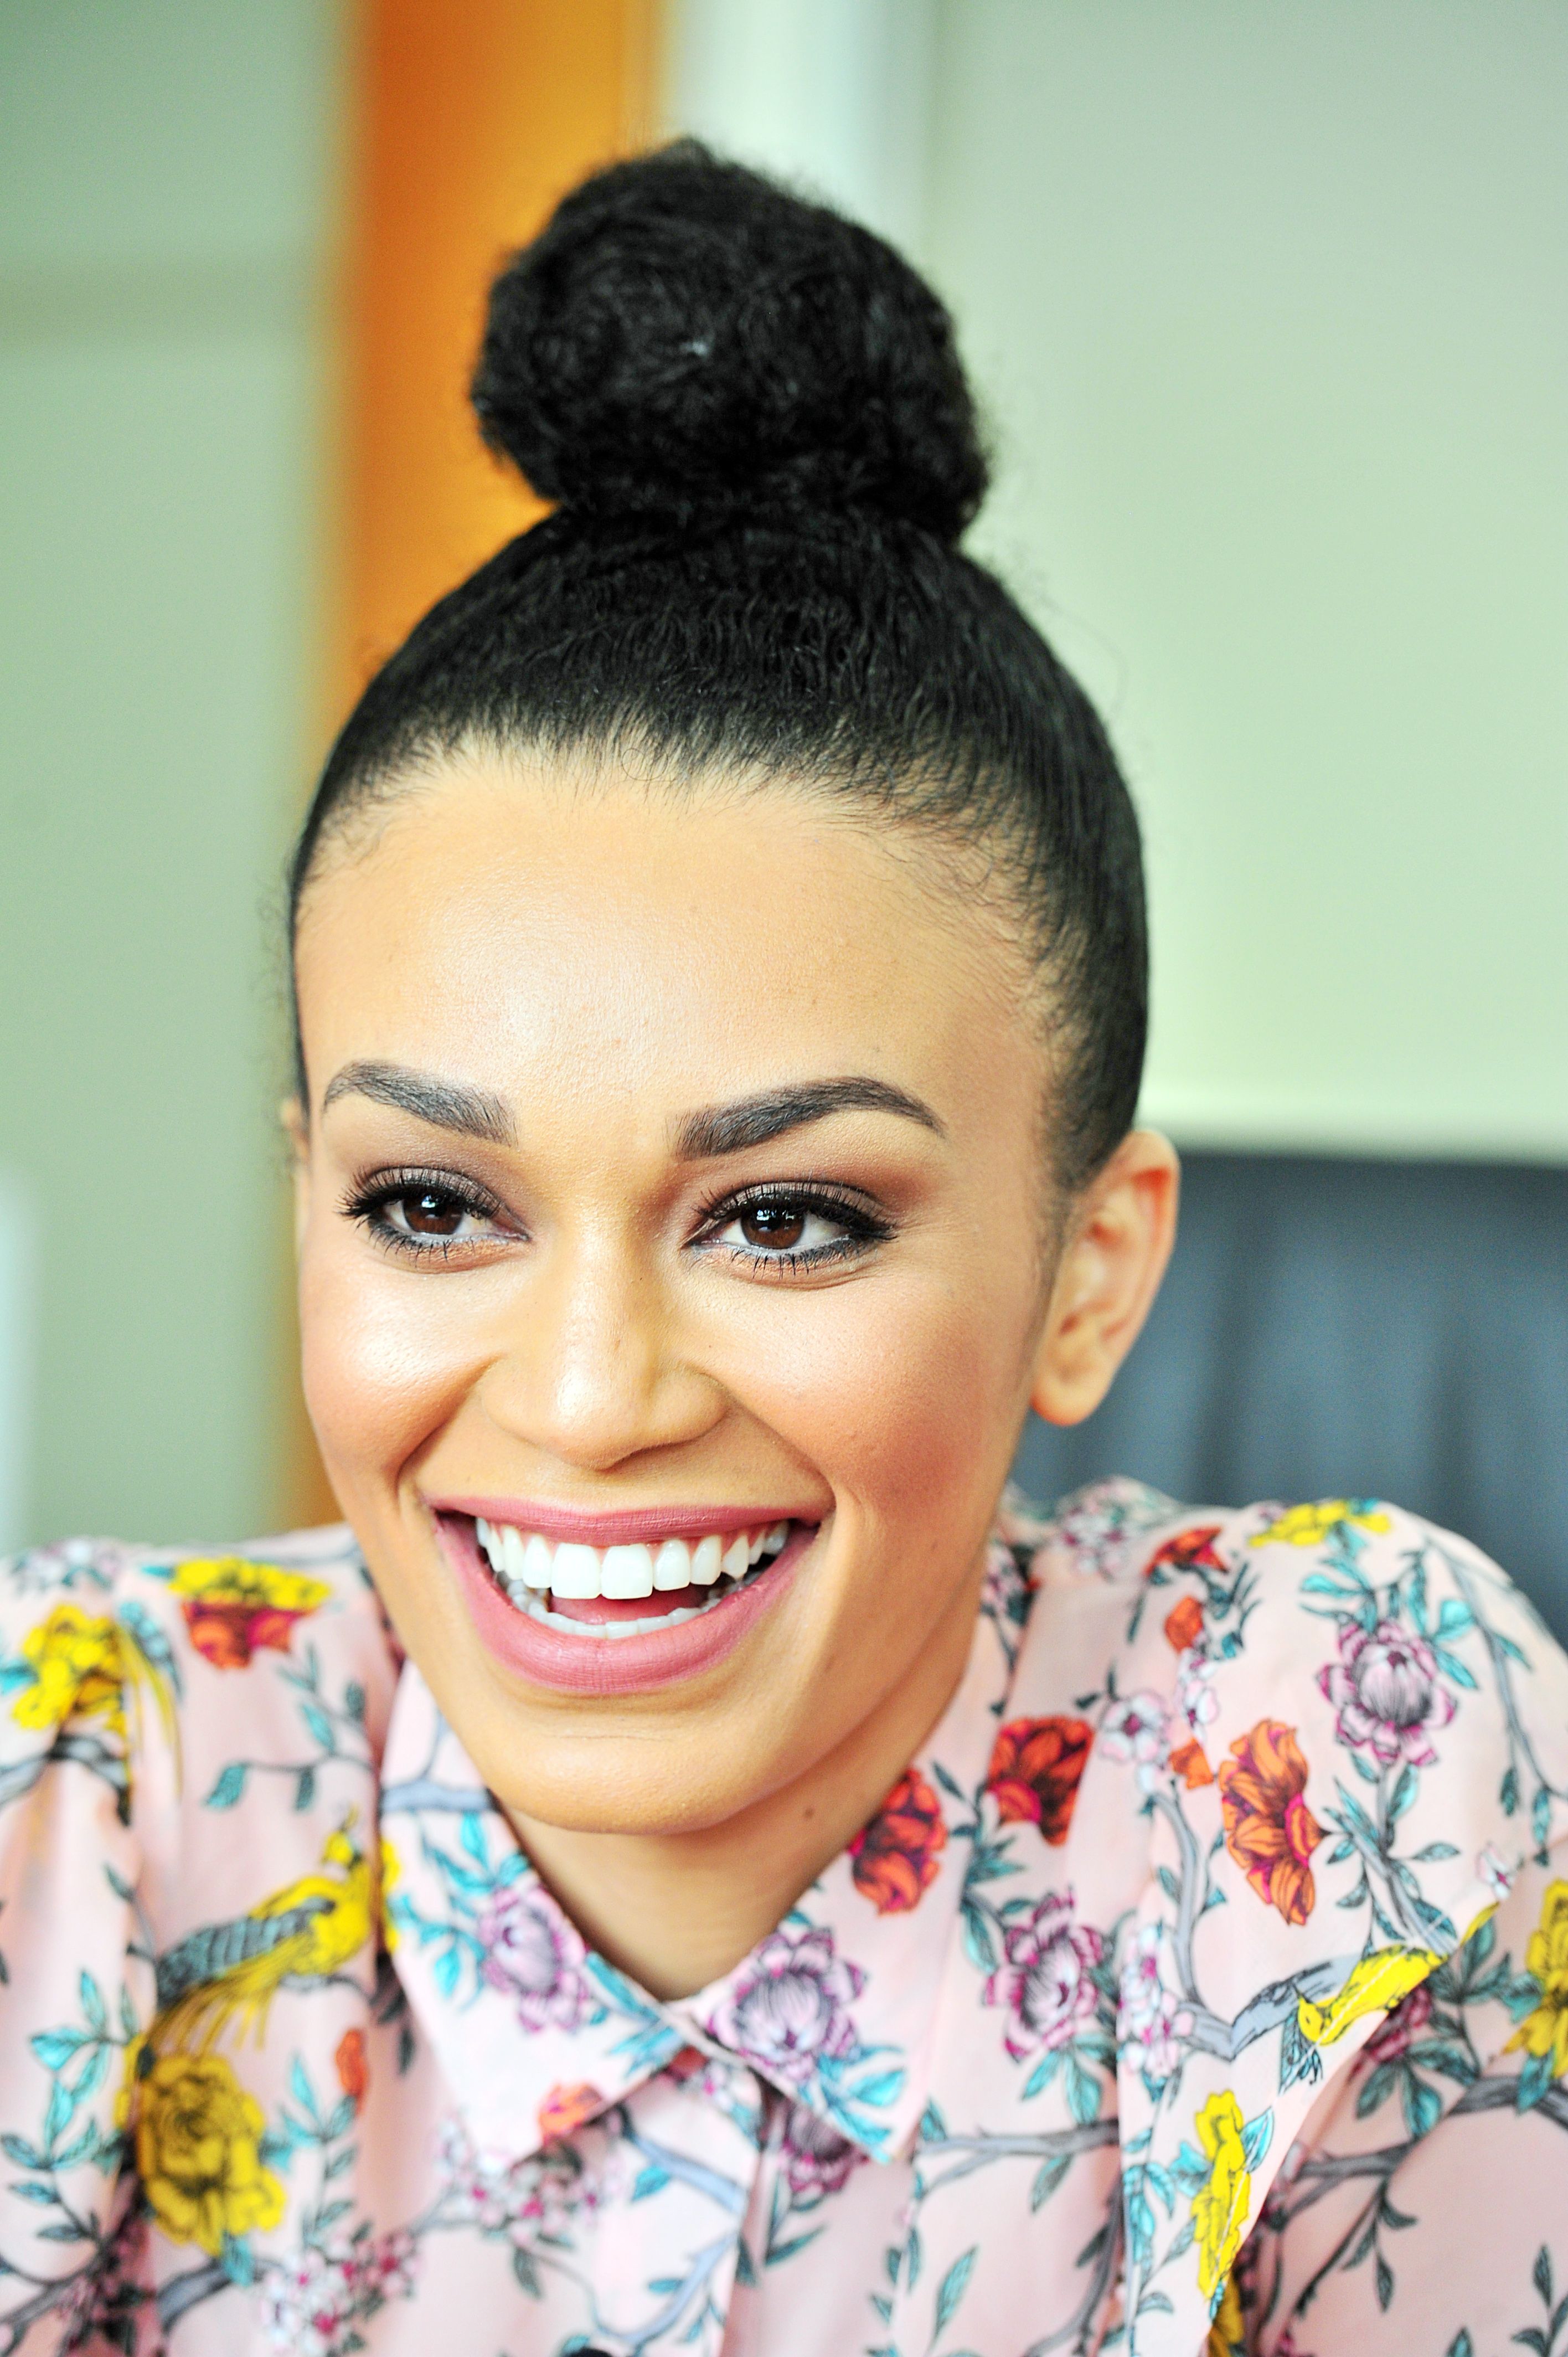 Who Is Pearl Thusi? Facts About Netflix's "Queen Sono" Star